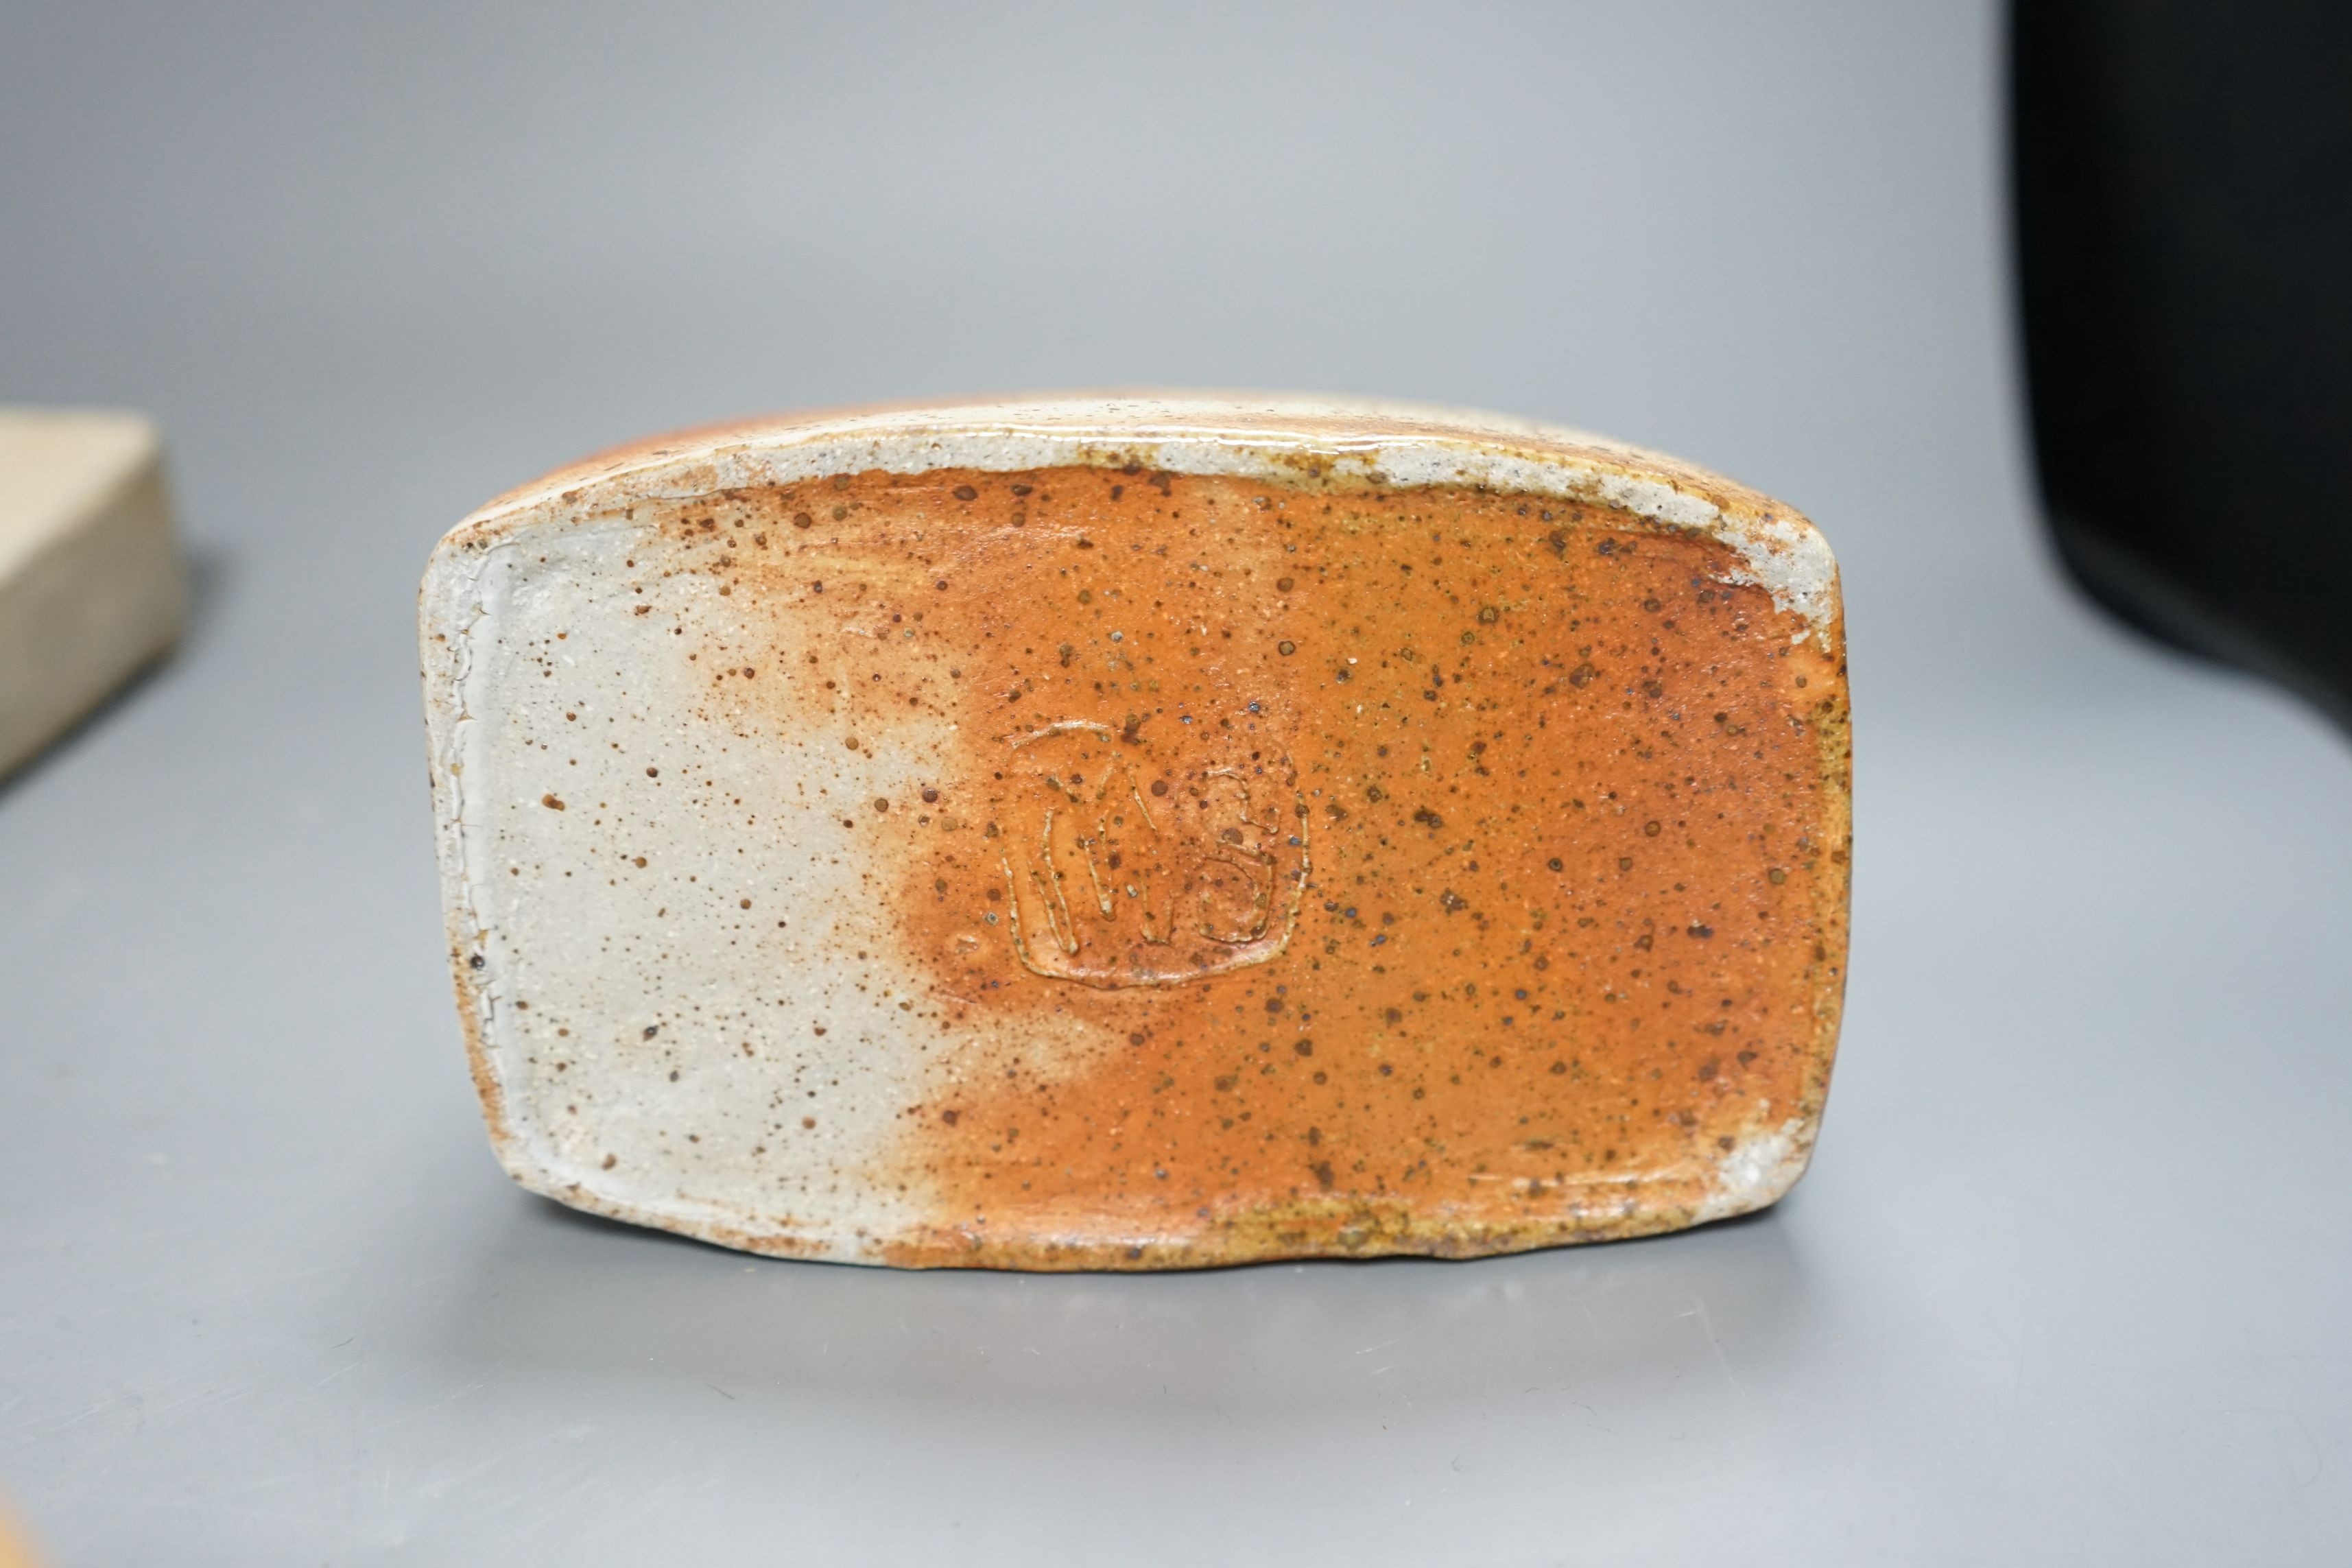 Sarah Walton (b.1945), a salt glazed stoneware flower brick, together with a salt glazed butter dish and cover, a similar mug, and a ‘Field’ horizontally carved linear slab, 22cm wide, all with impressed marks, (4)